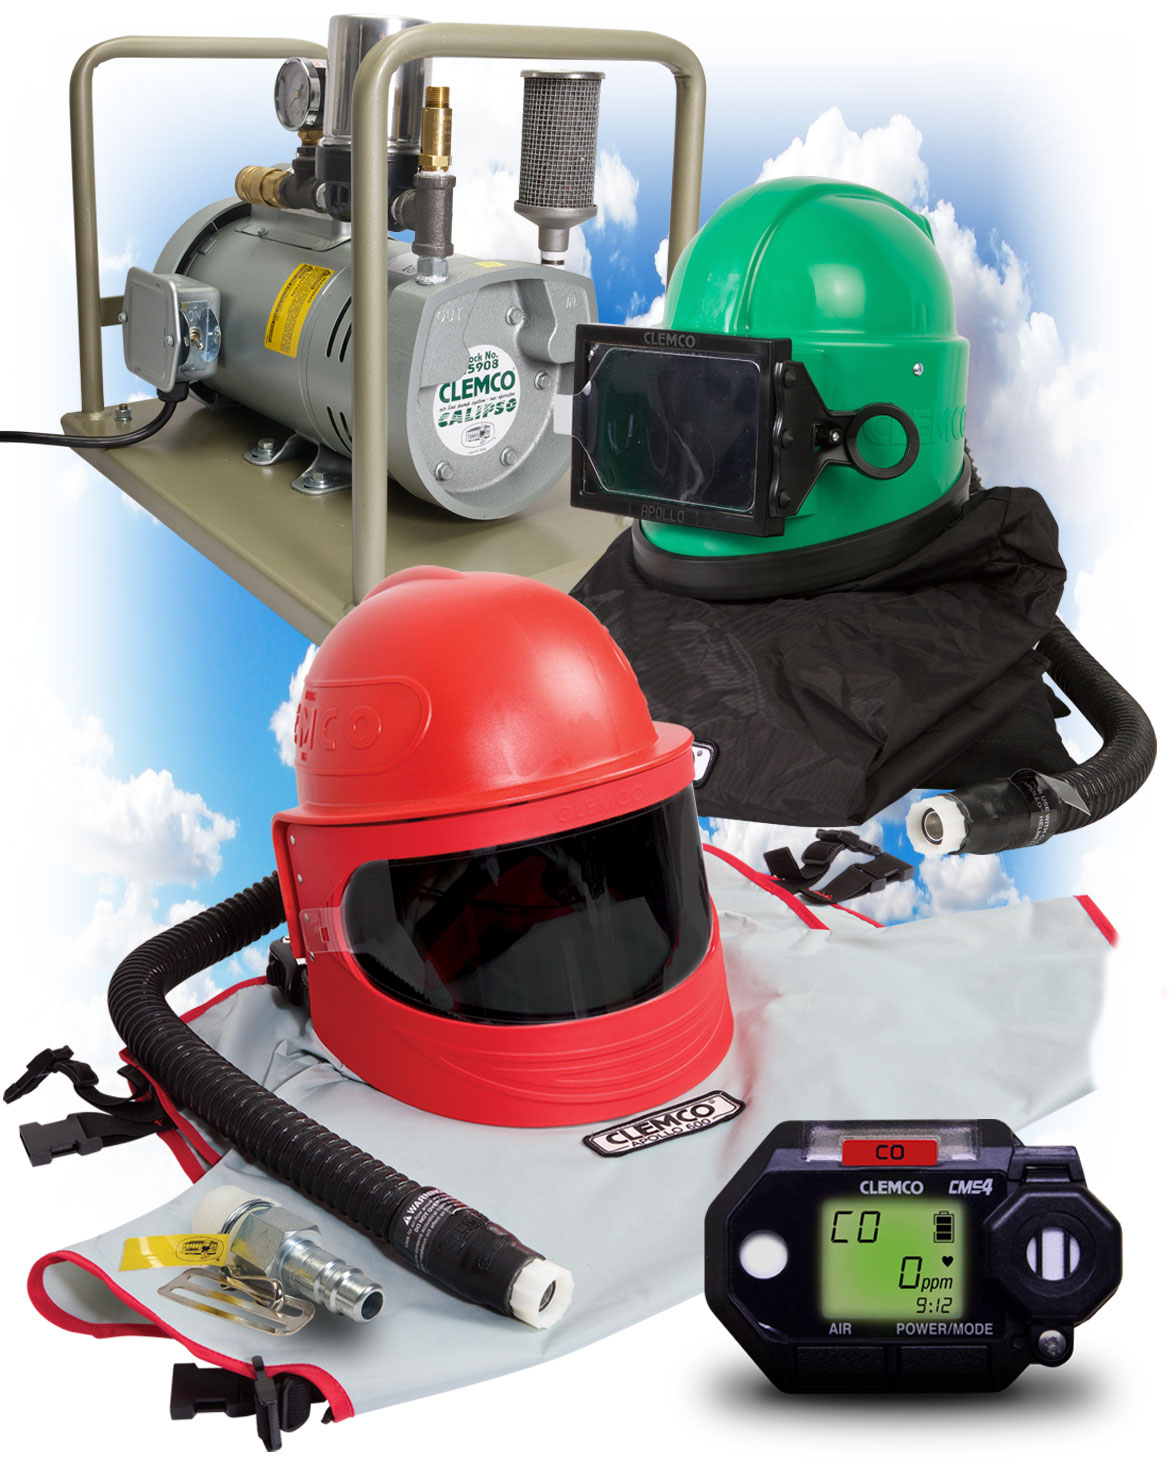 Apollo High-Pressure Respirator Systems, Safety Equipment, PPE